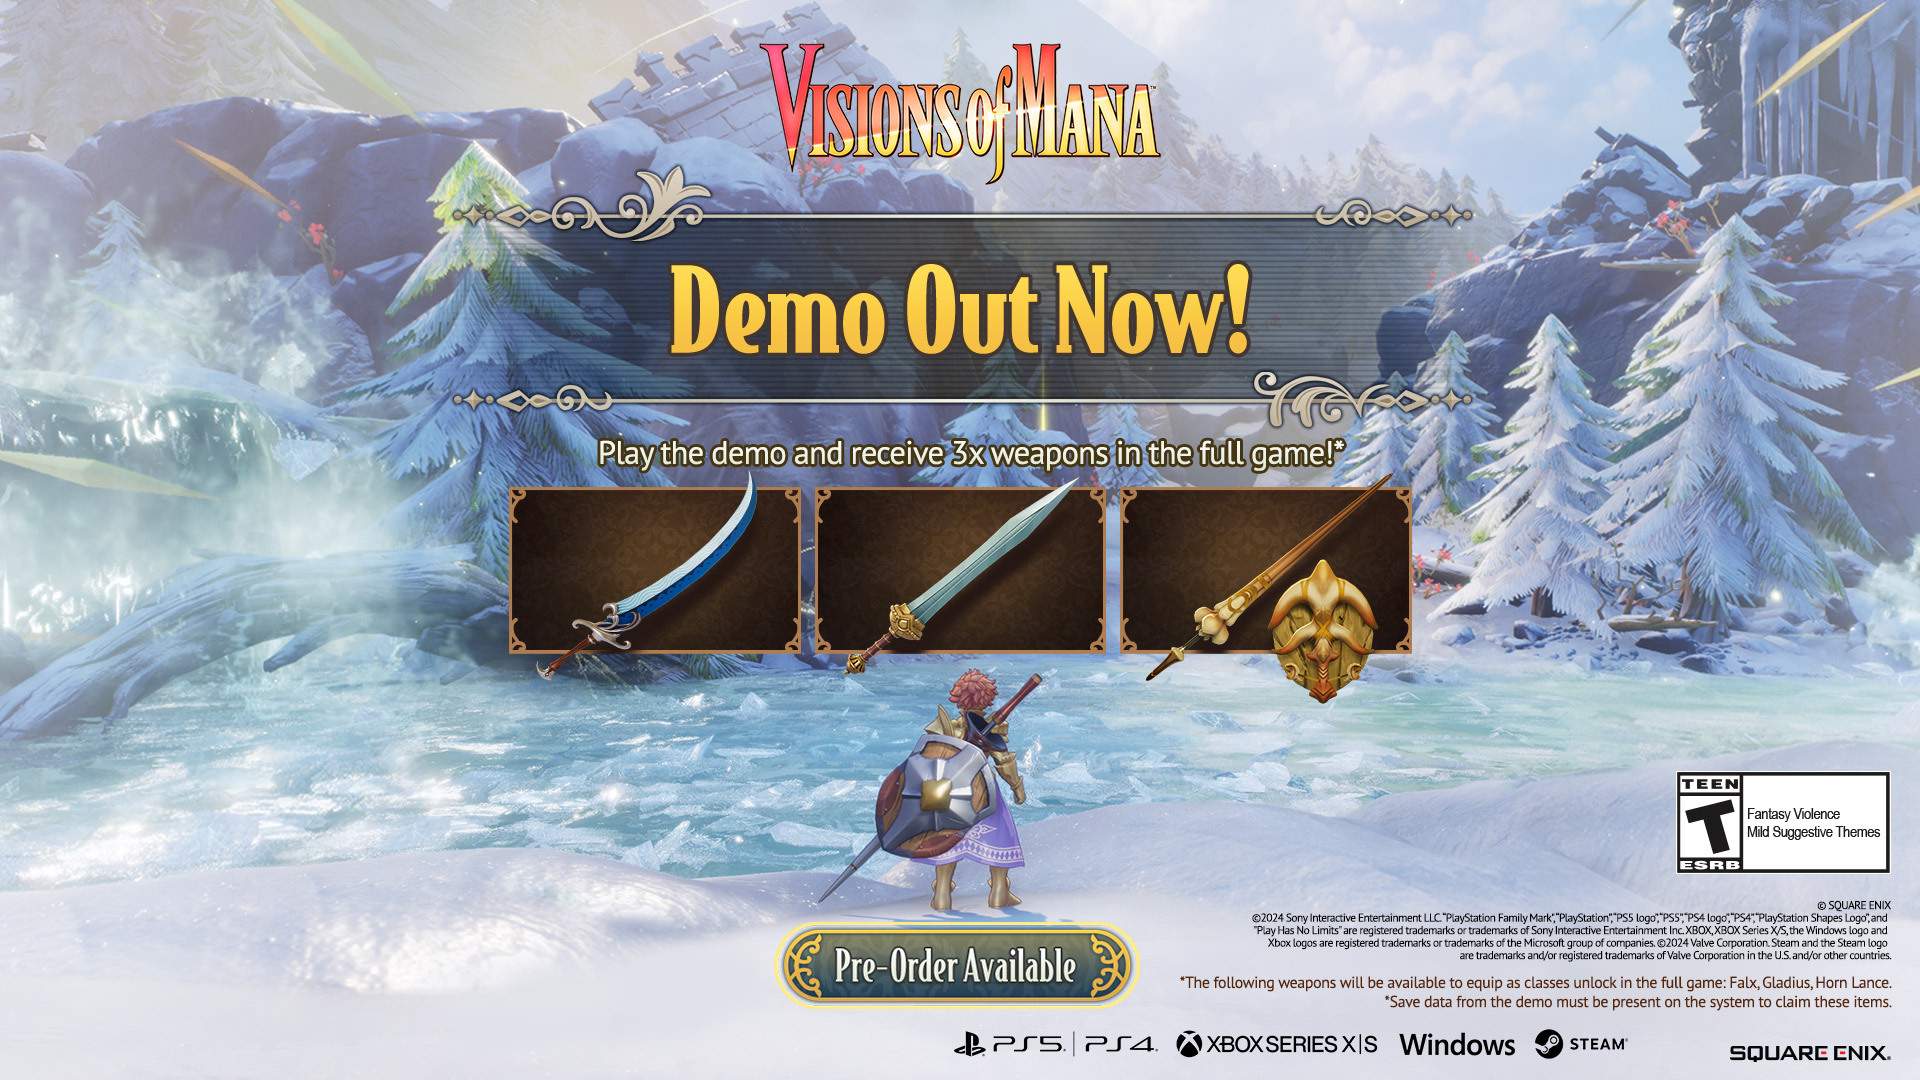 Val faces an icy river. Demo out now messaging is above him with 3 bonus weapons below.